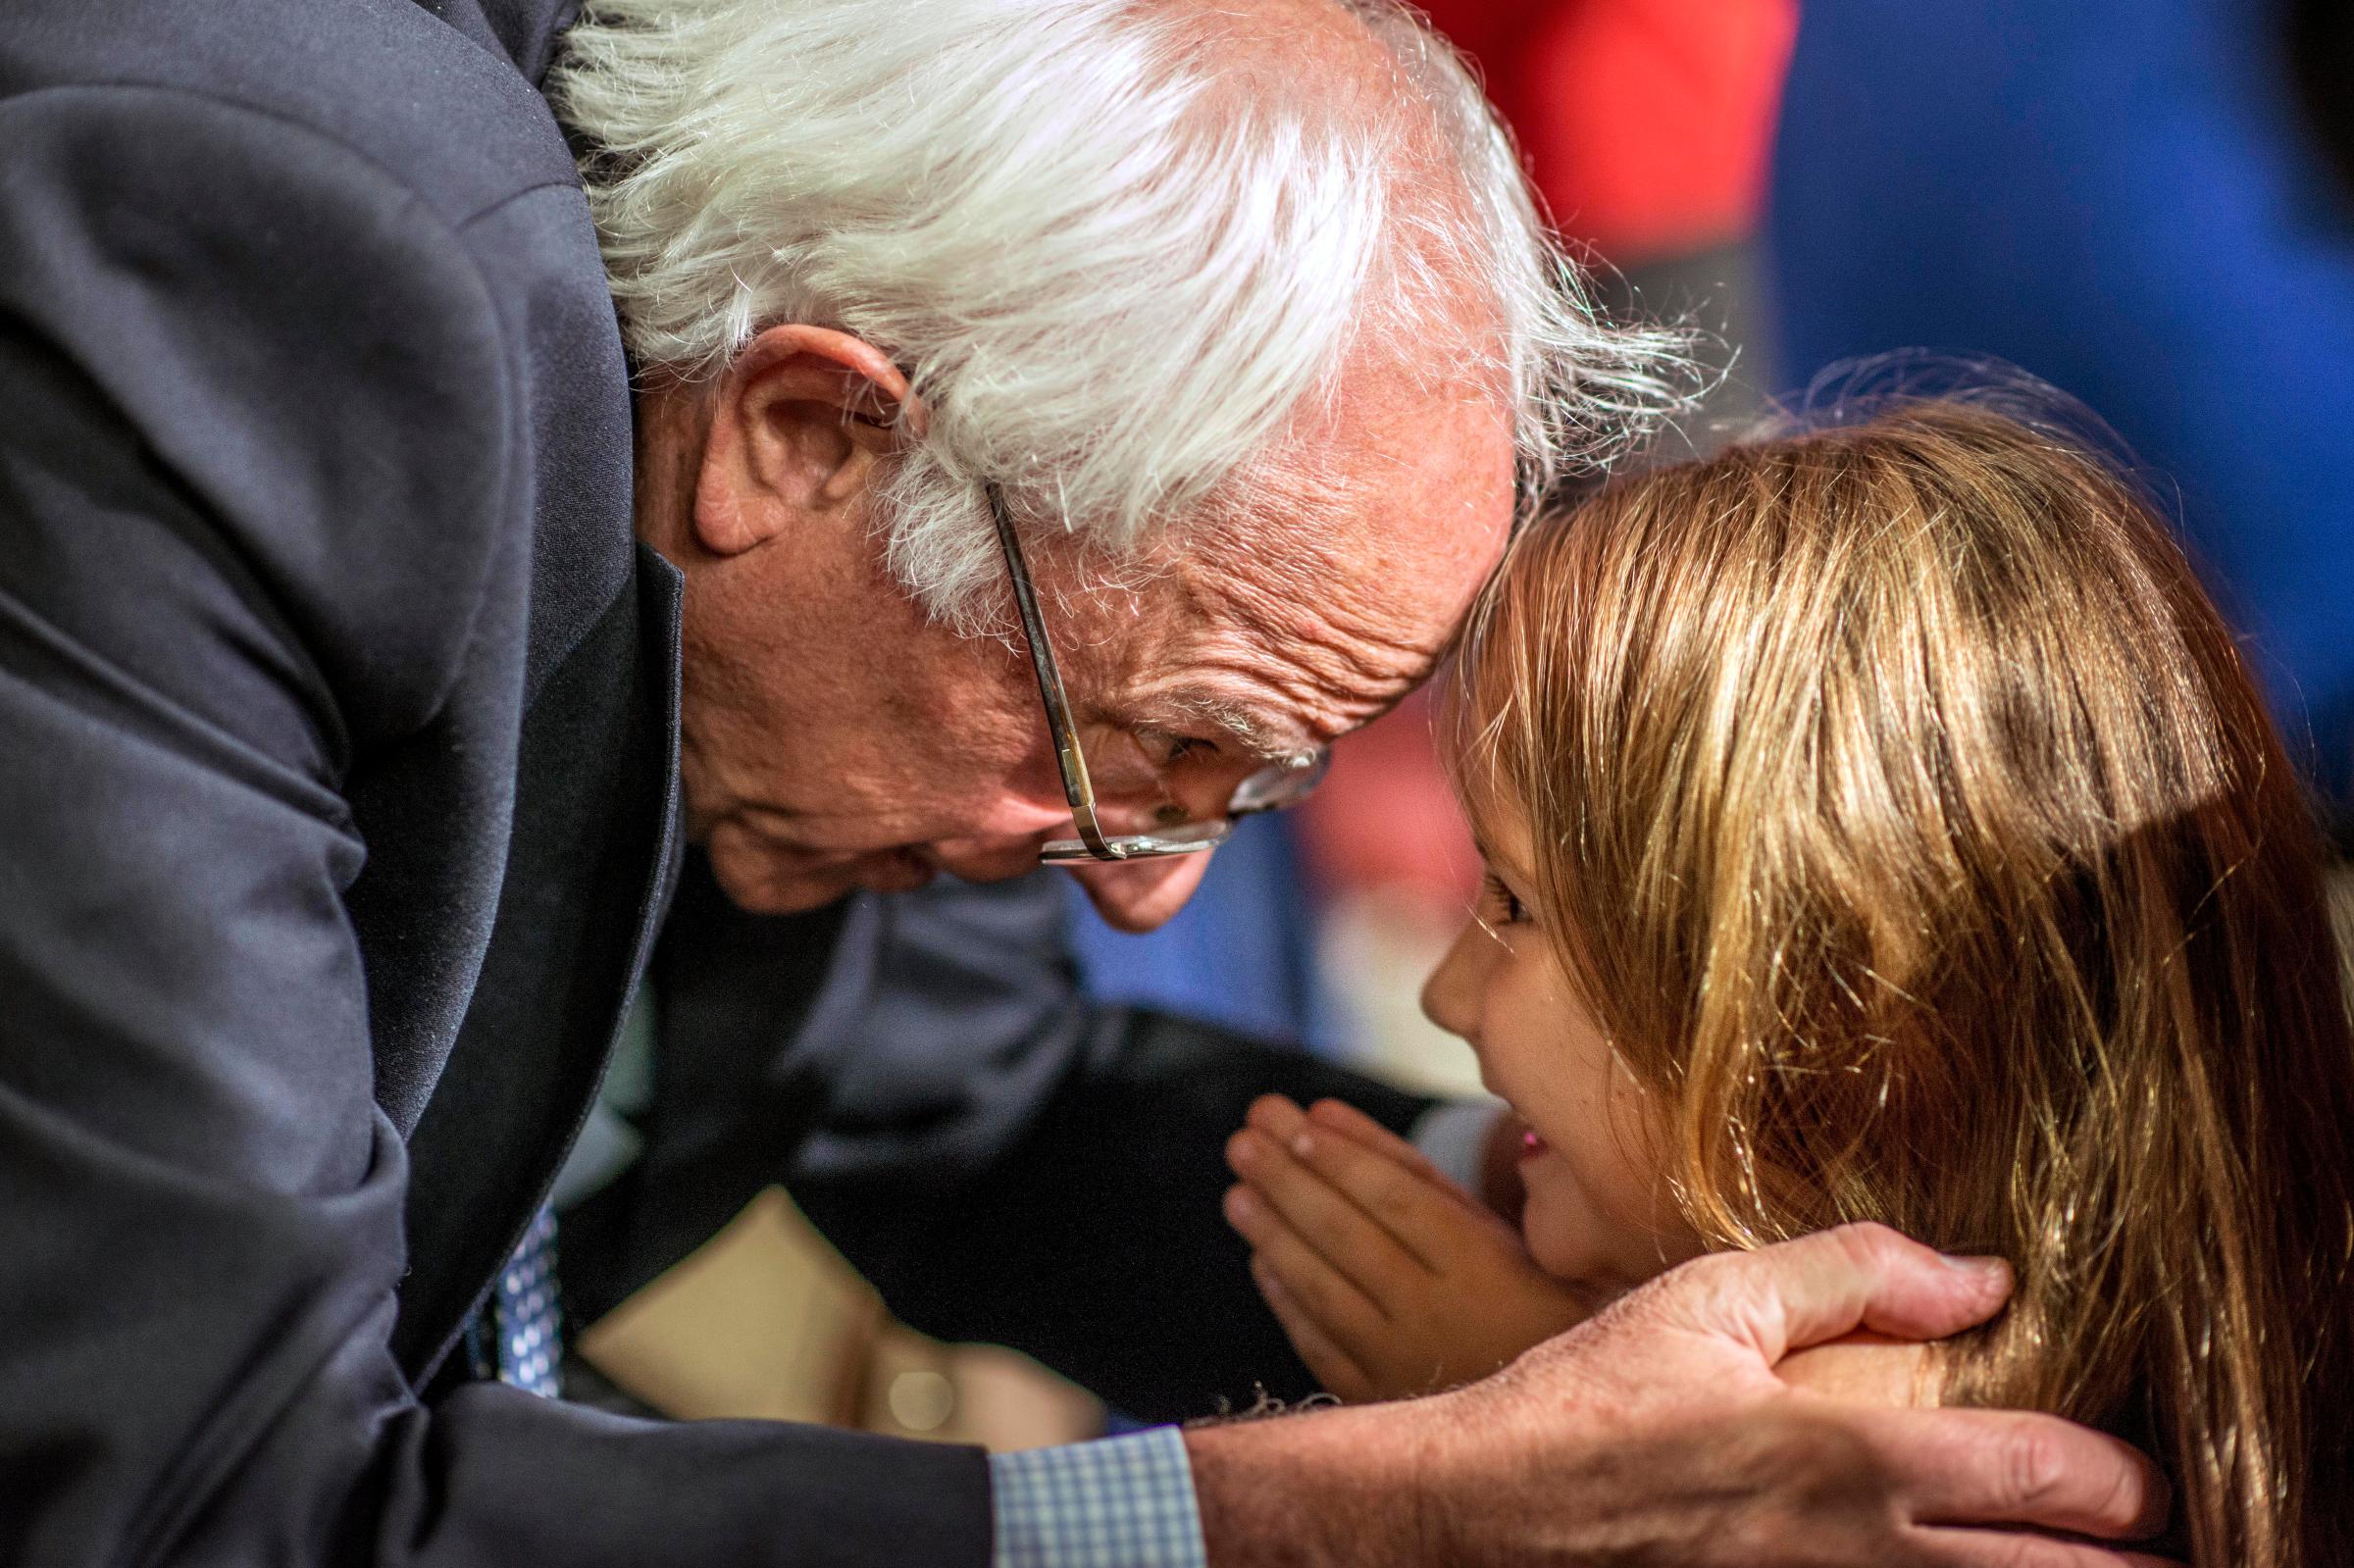 Democratic presidential candidate, Sen. Bernie Sanders (I-VT) meets supporters after a Town Hall meeting in Florence, S.C. on Sept. 12.